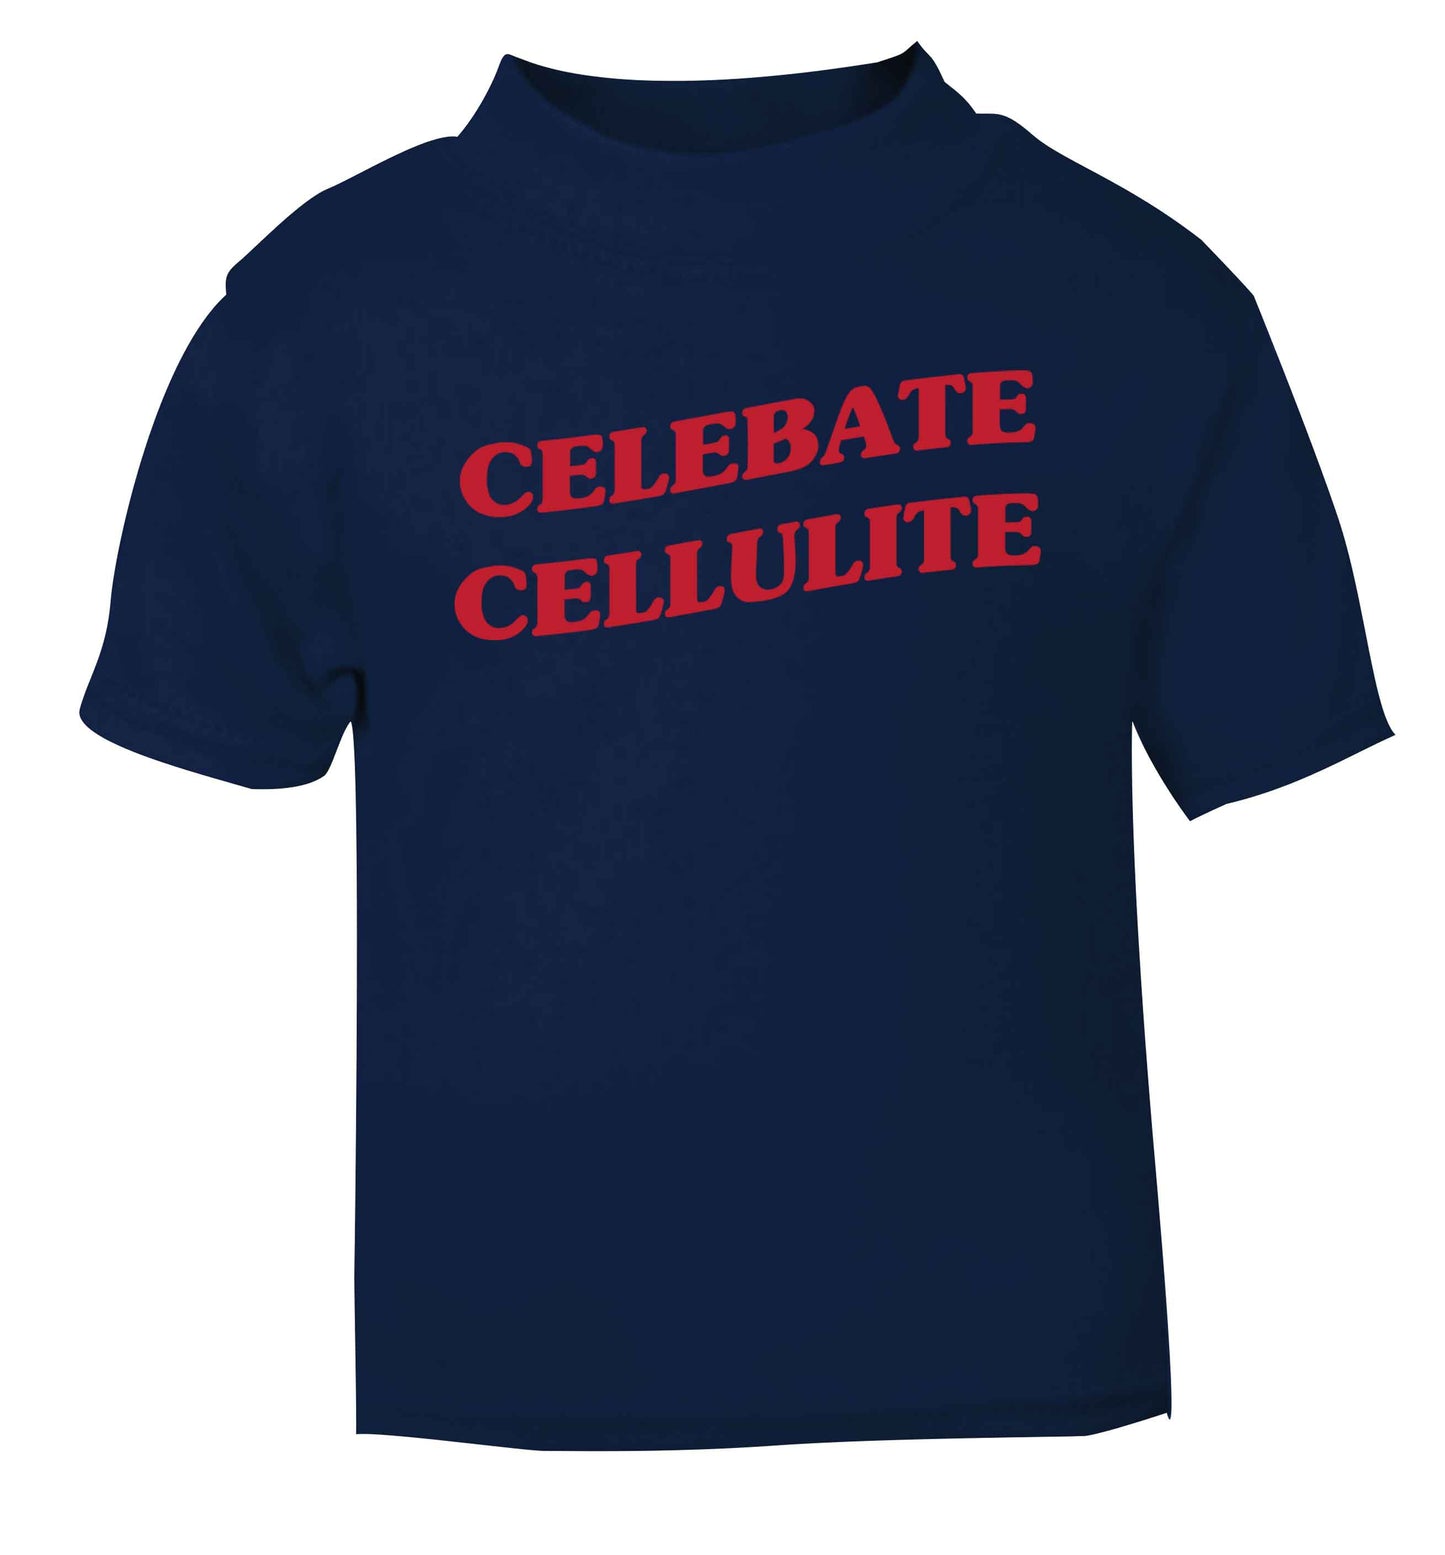 Celebrate cellulite navy baby toddler Tshirt 2 Years